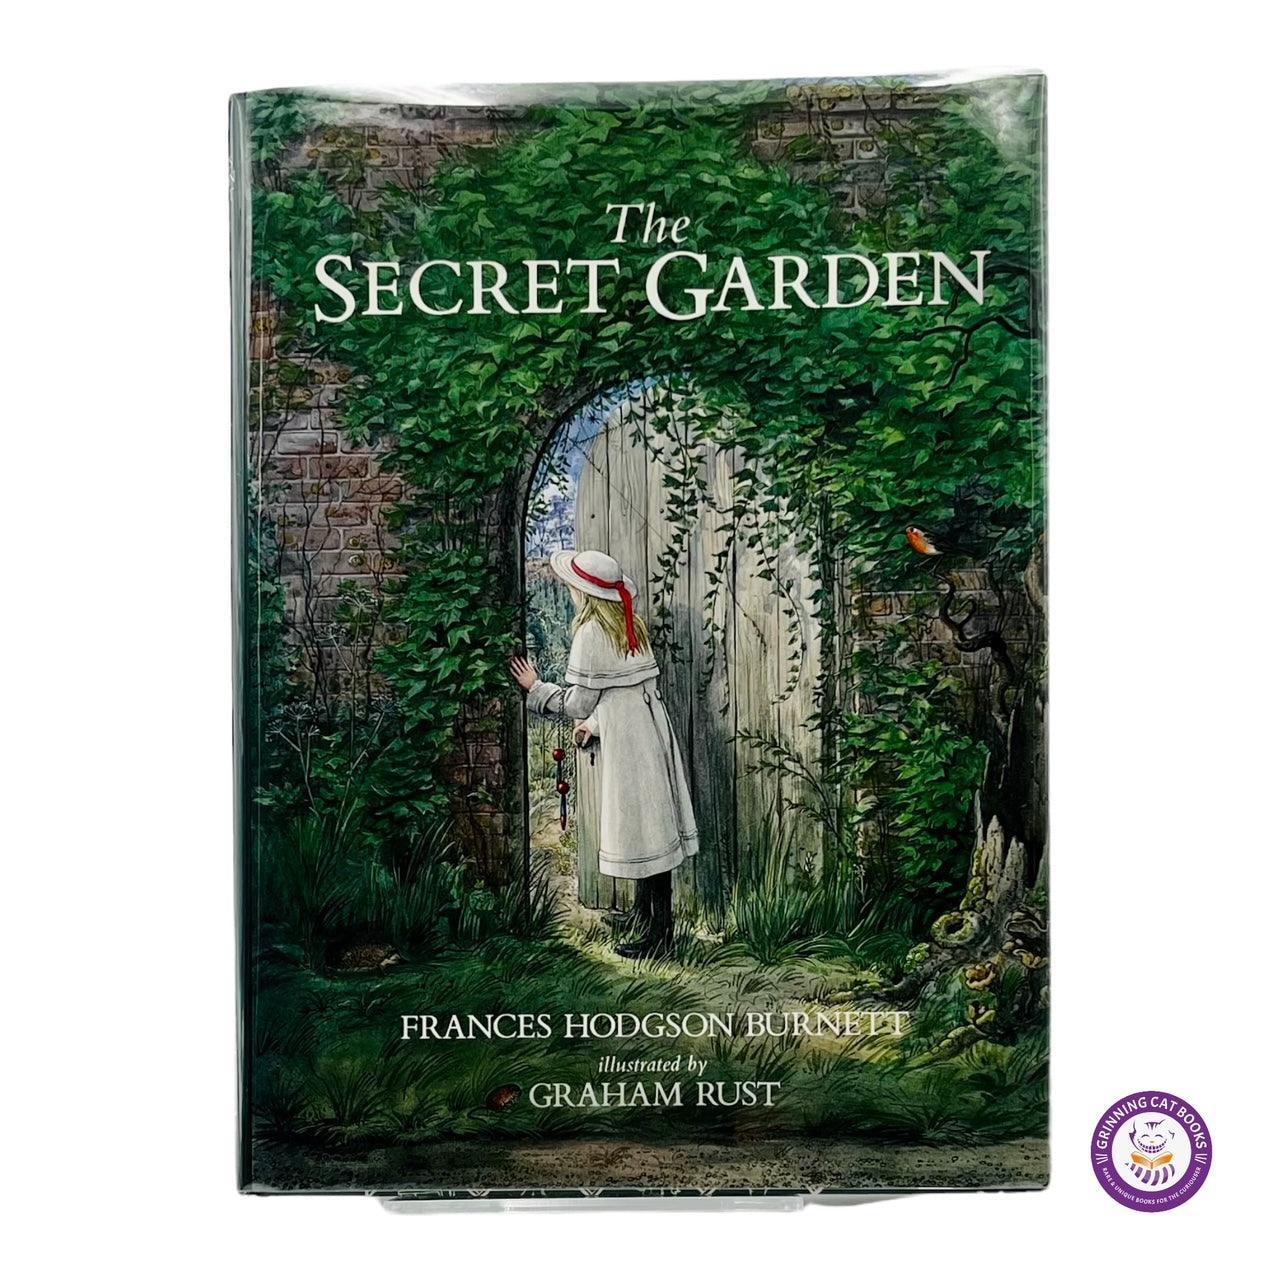 The Secret Garden (signed by renowned artist, Graham Rust) - Grinning Cat Books - CHILDREN'S LITERATURE - SIGNED